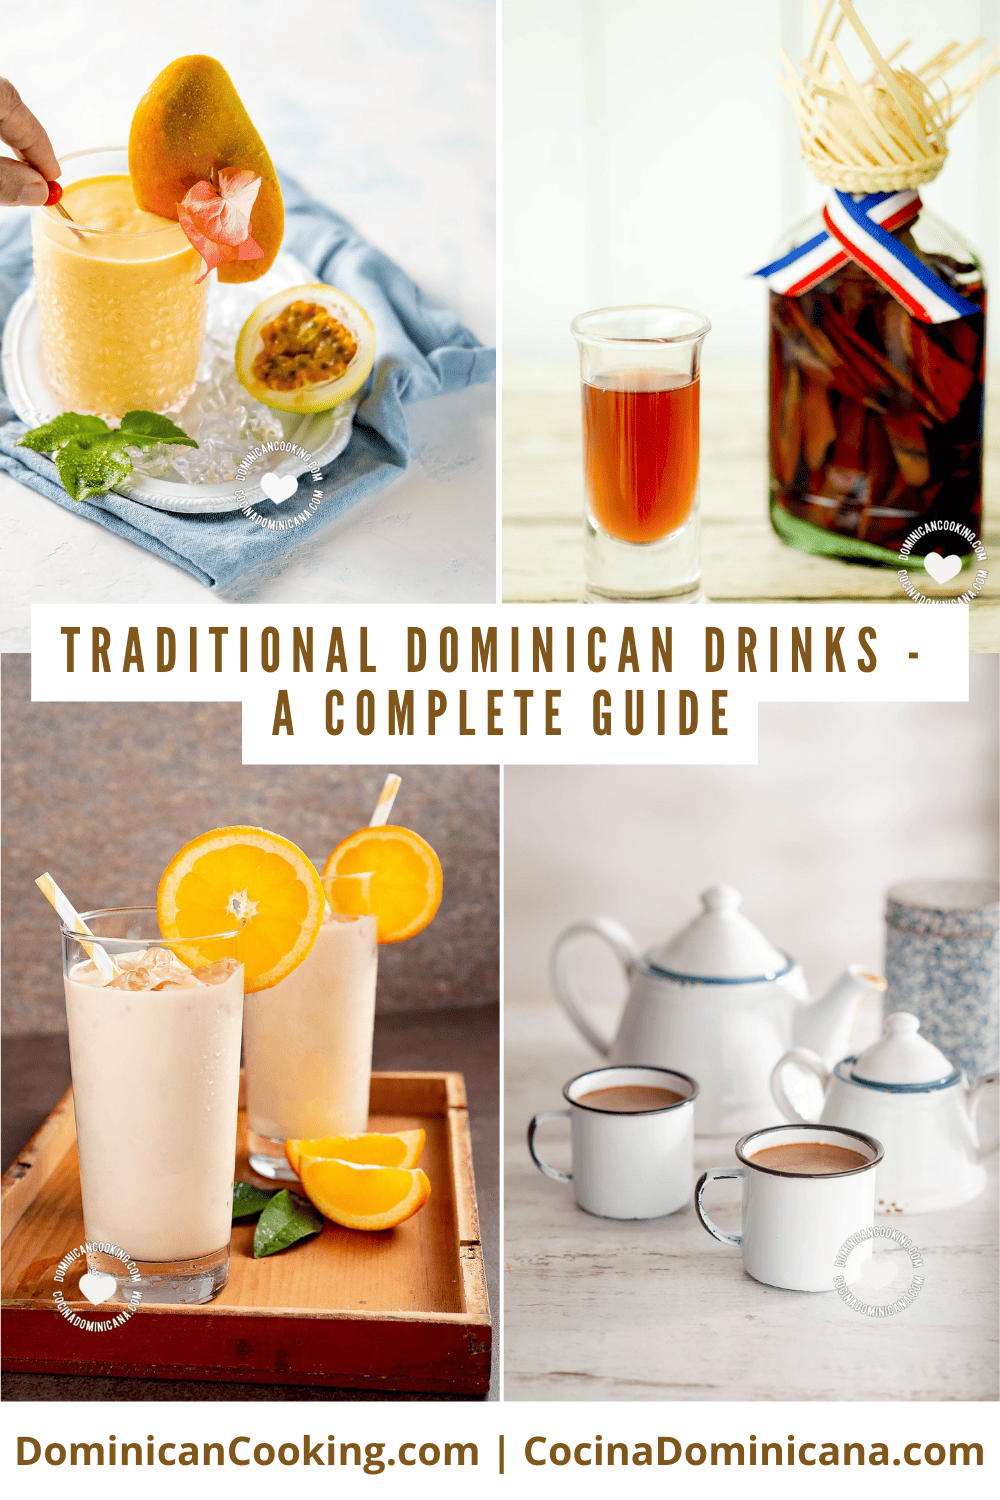 Tradicional Dominican drinks- complete guide.